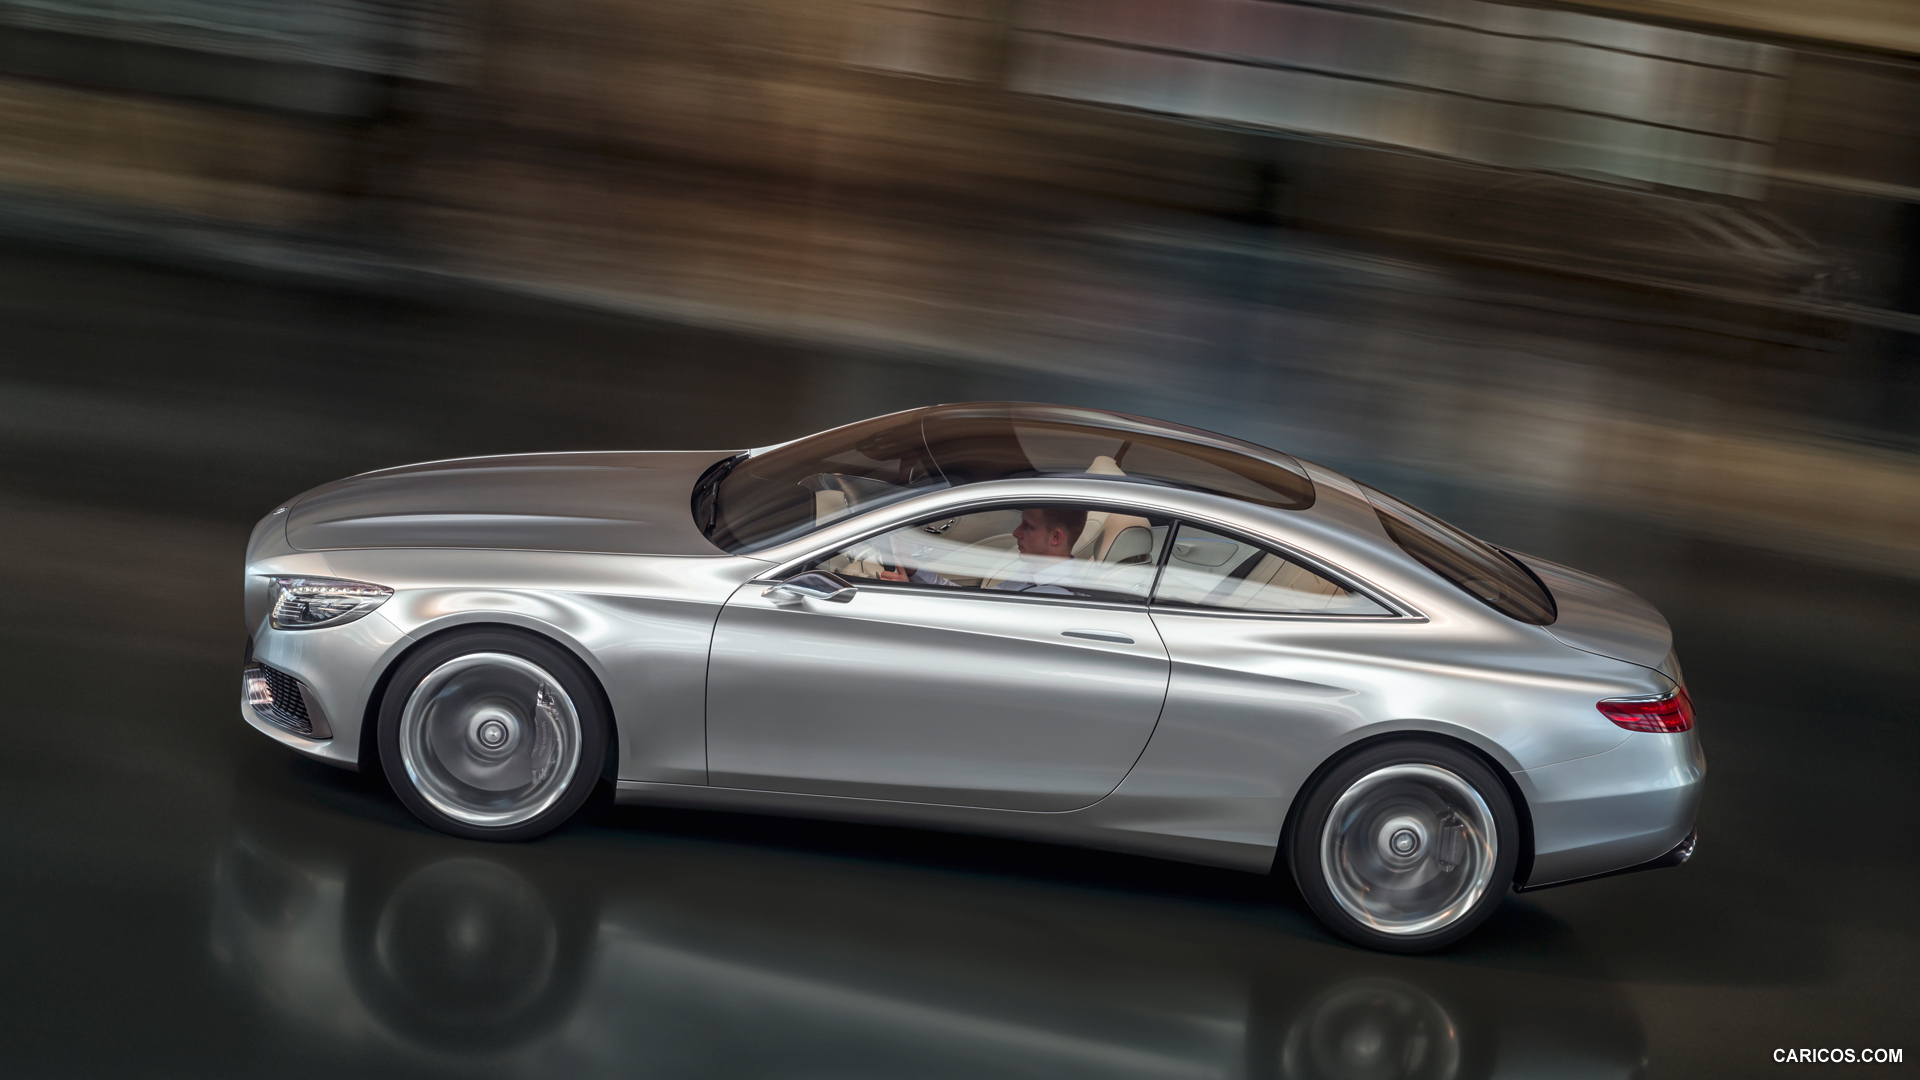 Mercedes-Benz S-Class Coupe Concept (2013)  - Side, #3 of 58